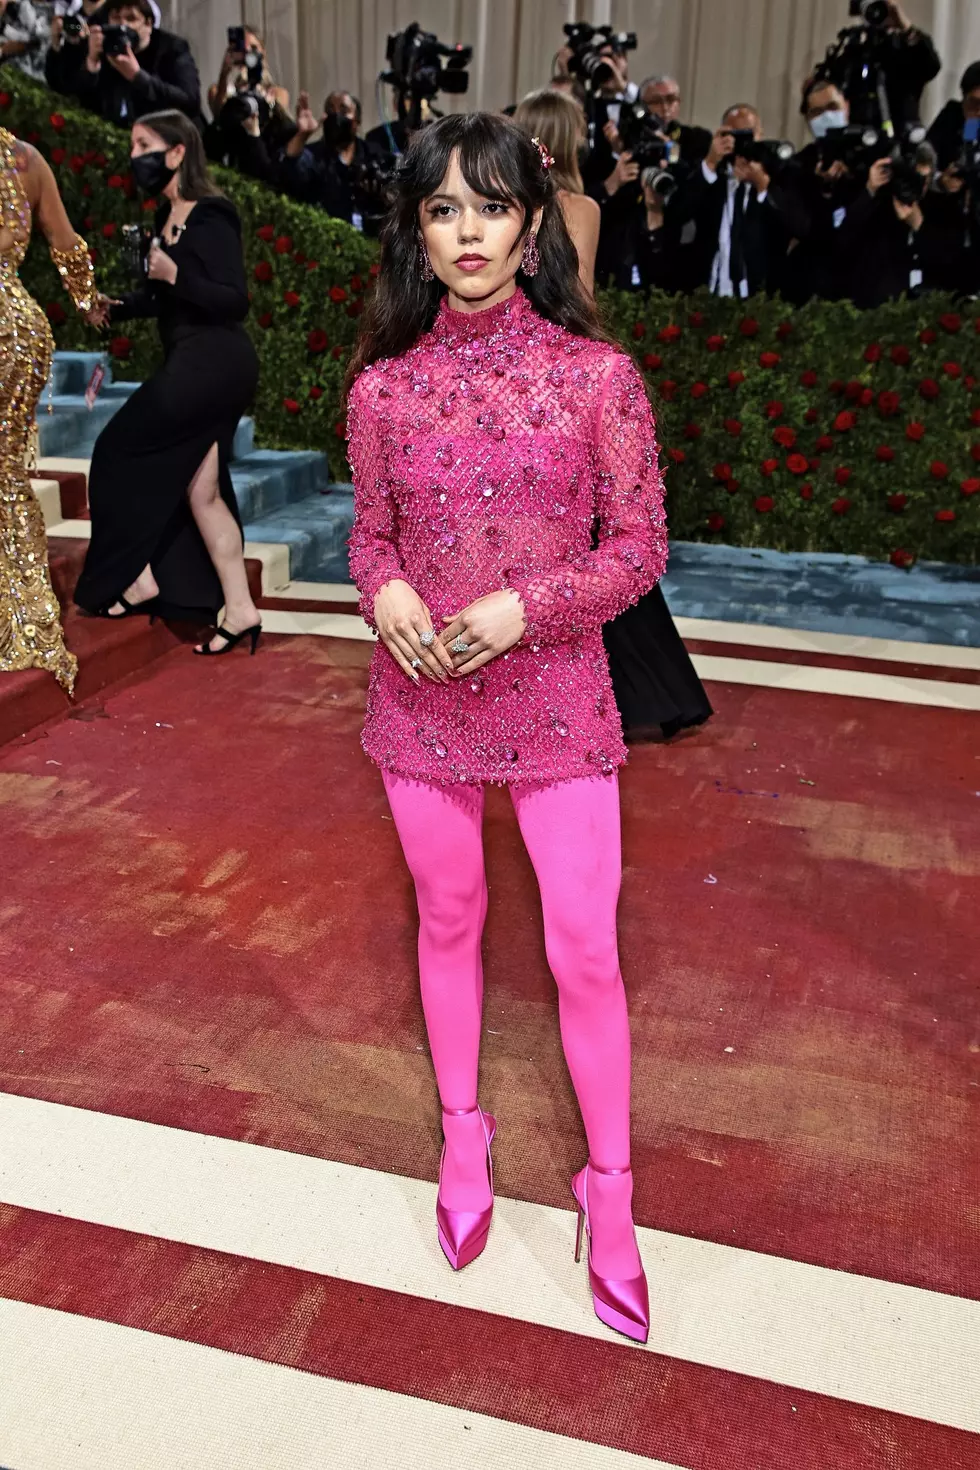 Met Gala 2022 Red Carpet: Emma Stone Embraces 1920s Flapper Girl Avatar to  Leave Fashion Police Impressed!